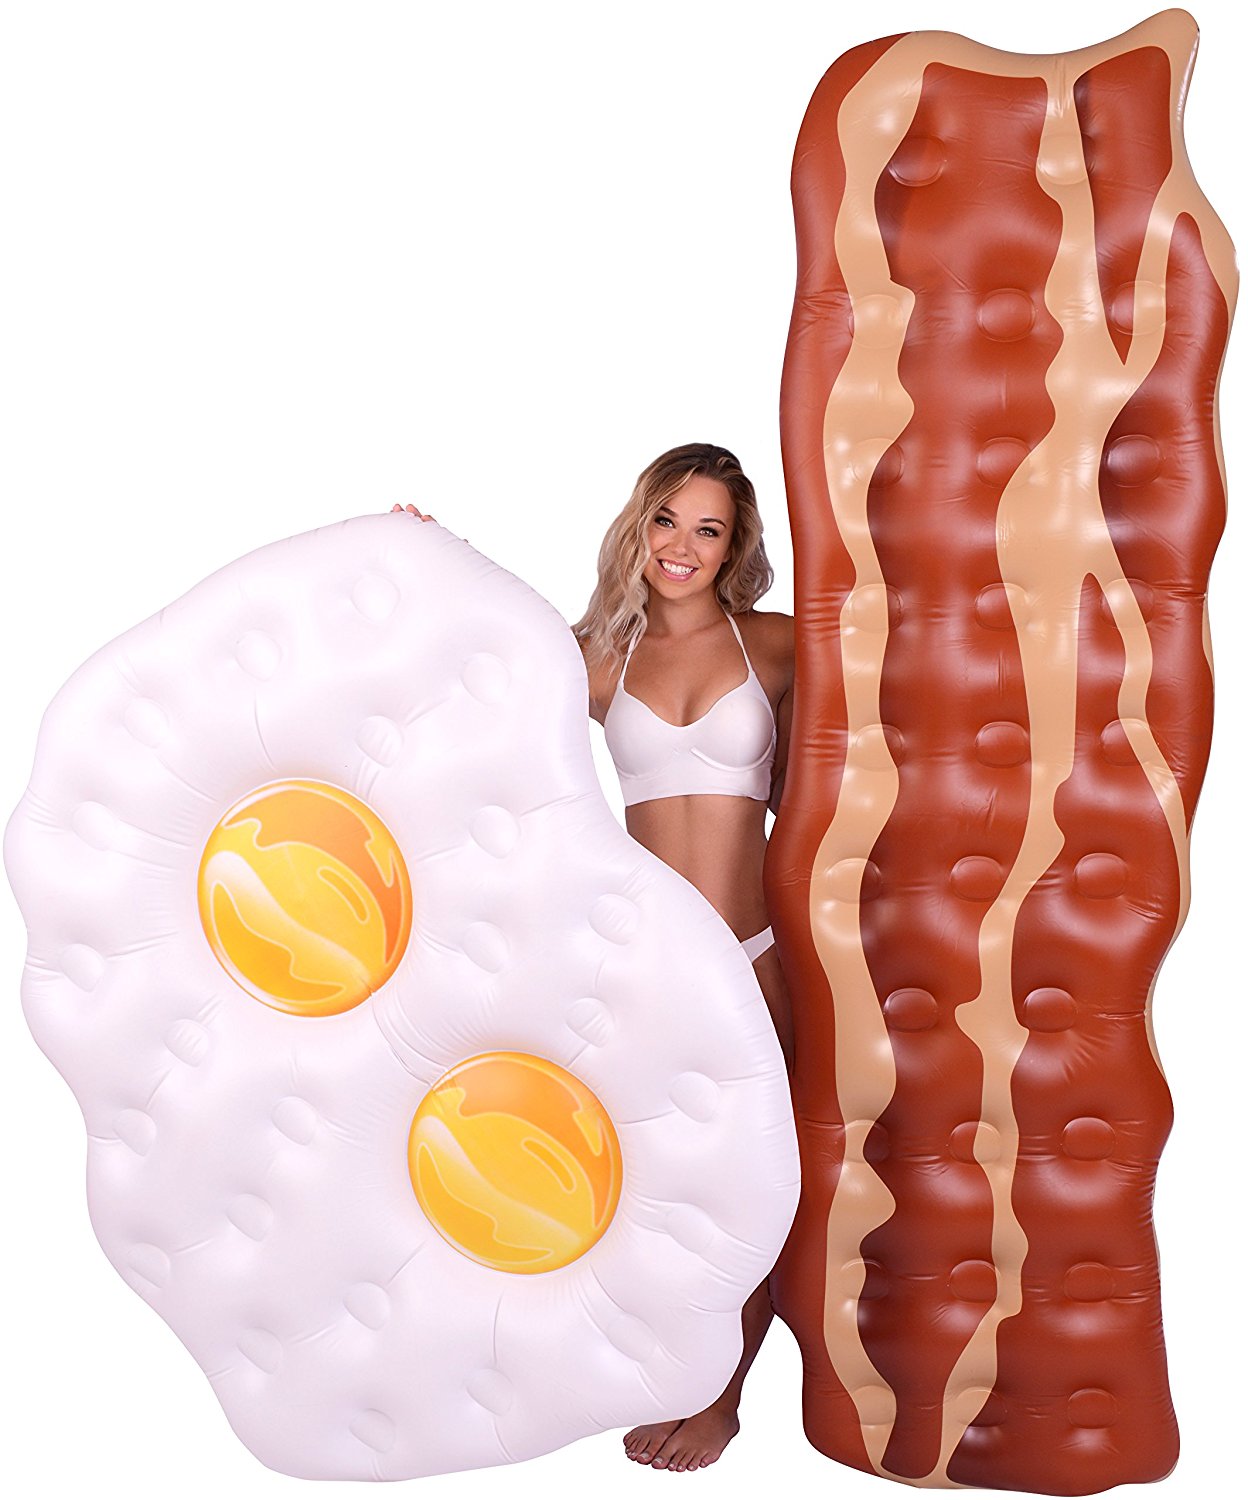 Eggs & Bacon Raft - The most Instagram worthy Pool Floats Summer 2017